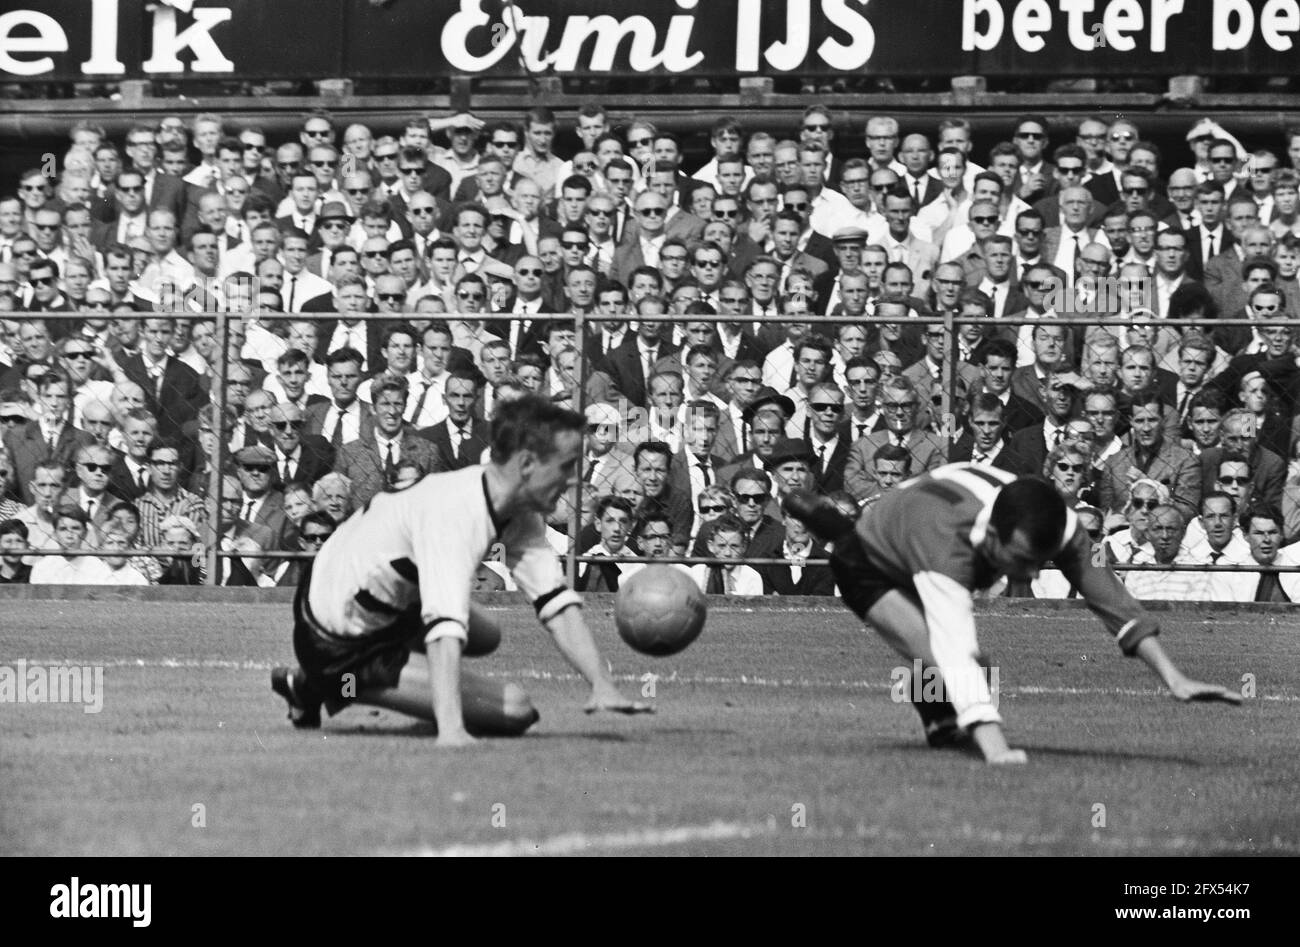 Feyenoord v DOS 4-2, Coen Moulijn stumbles, August 23, 1964, sports, soccer, The Netherlands, 20th century press agency photo, news to remember, documentary, historic photography 1945-1990, visual stories, human history of the Twentieth Century, capturing moments in time Stock Photo